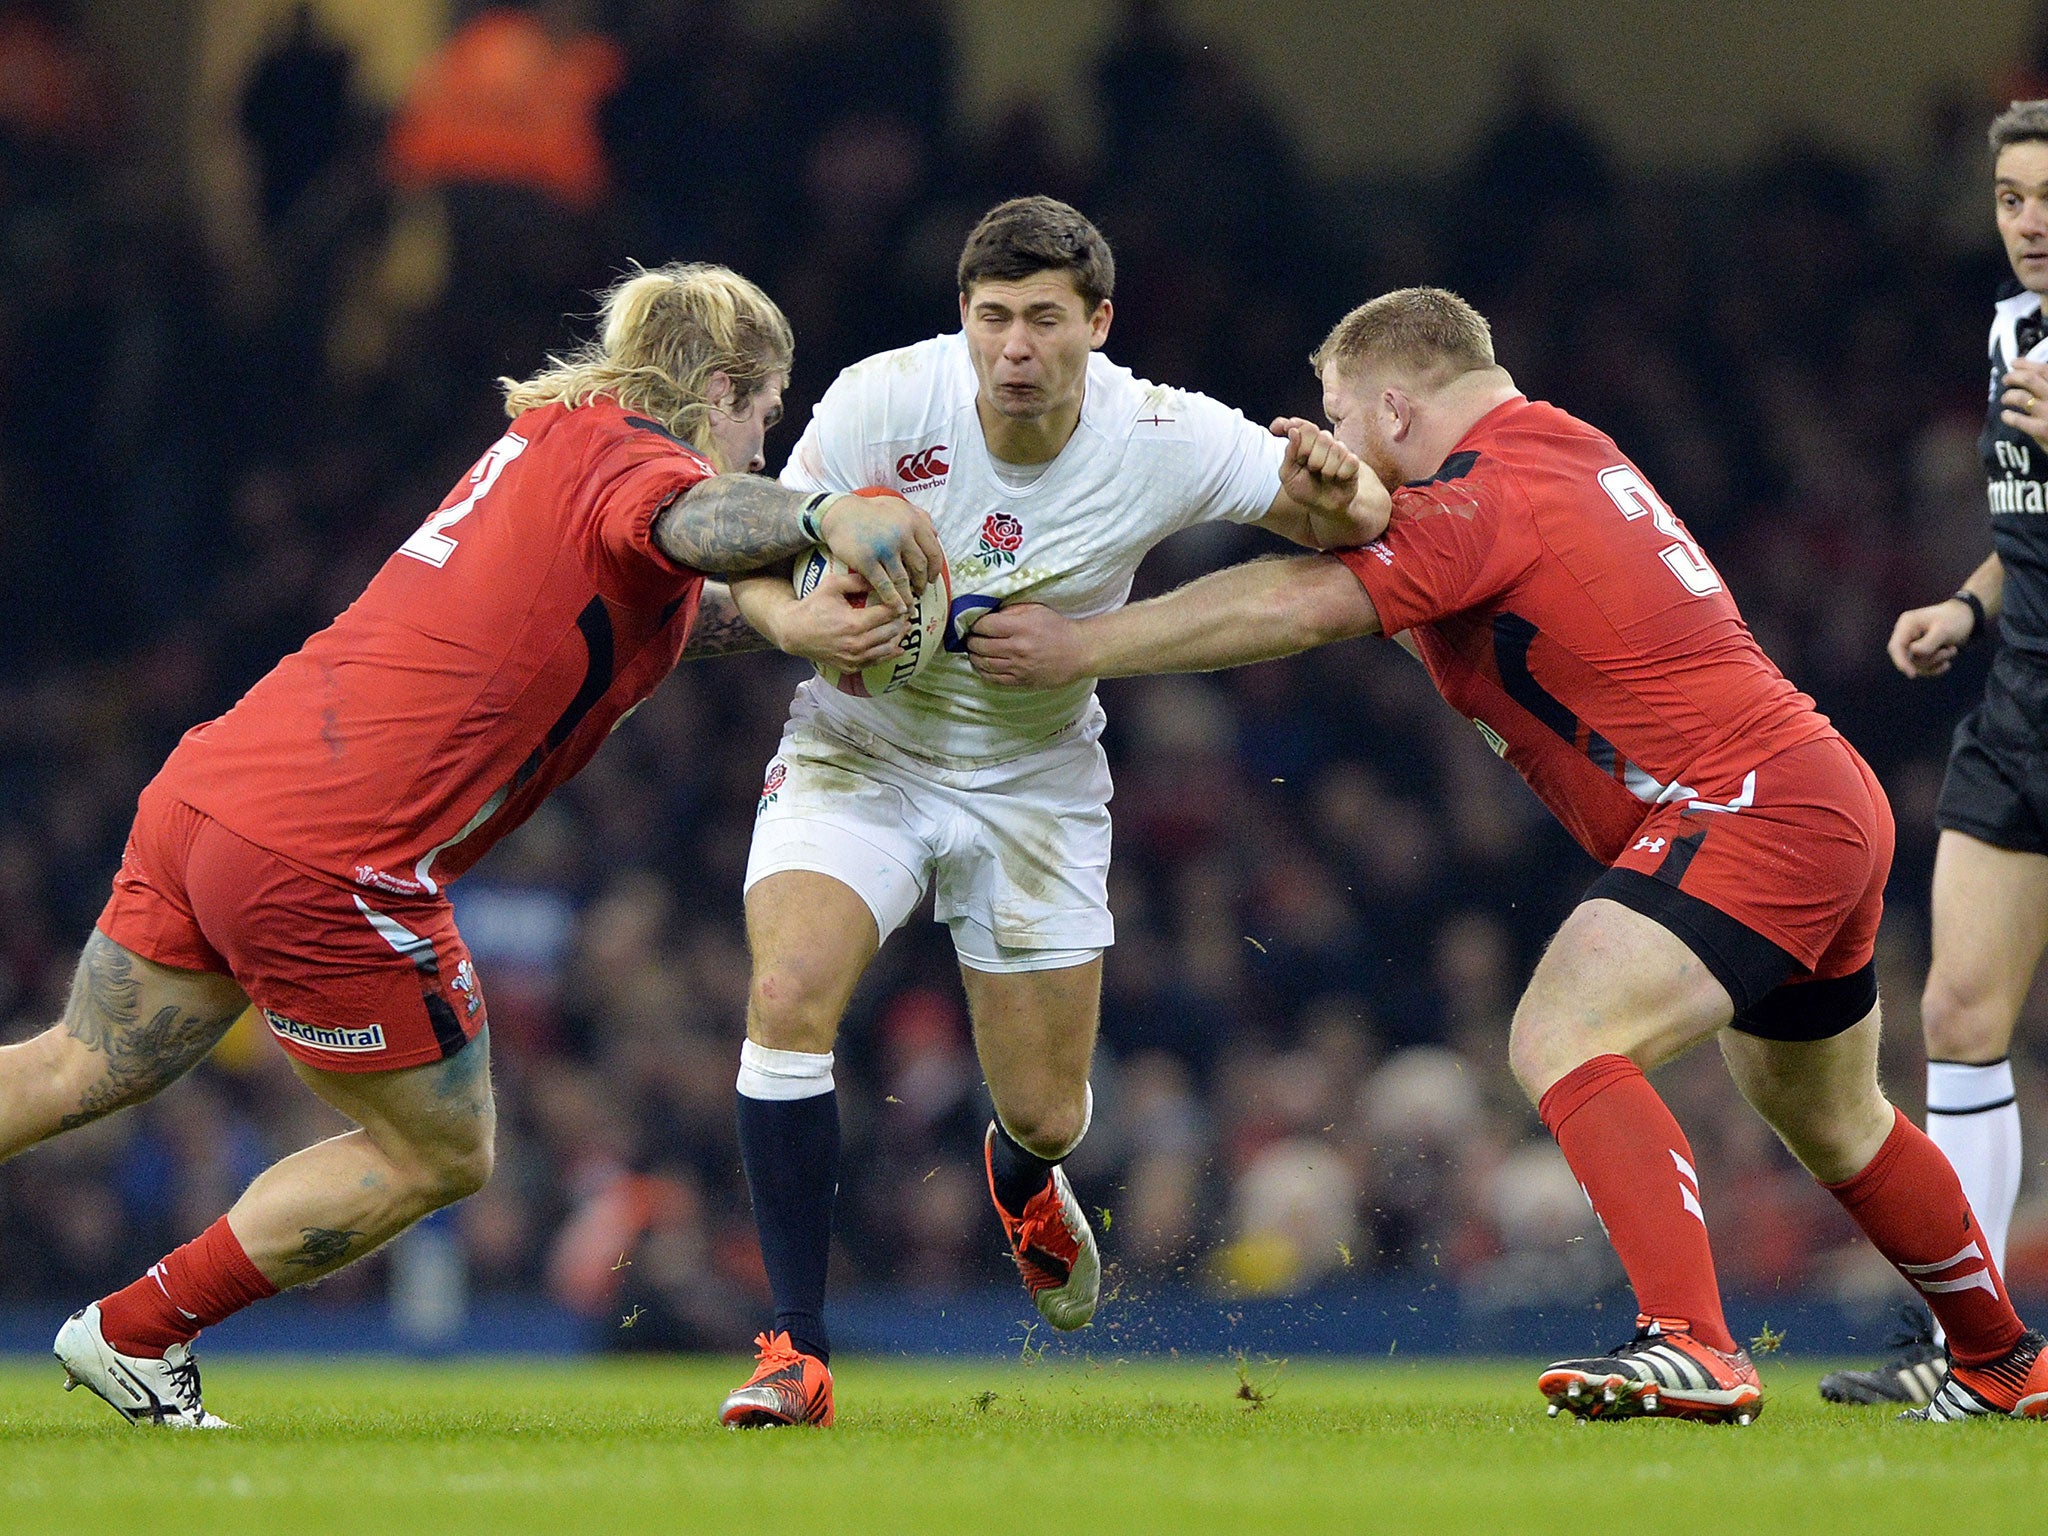 Ben Youngs charges forward